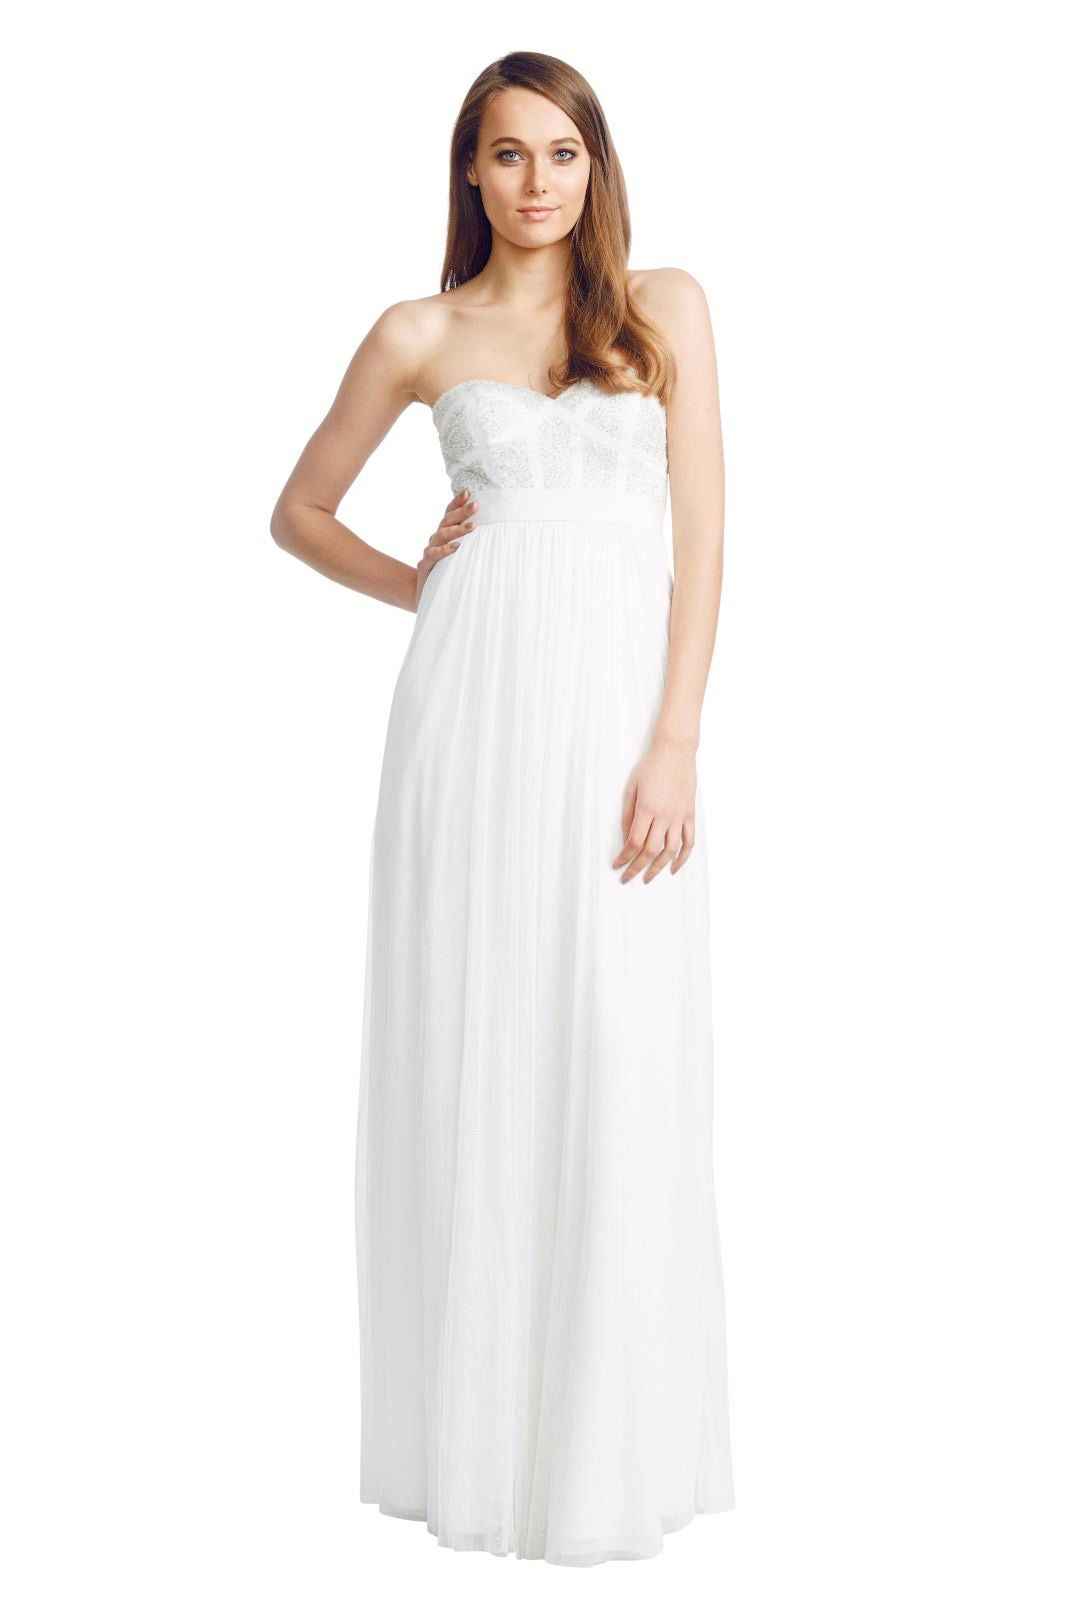 George - Pixel Gown - White - Front